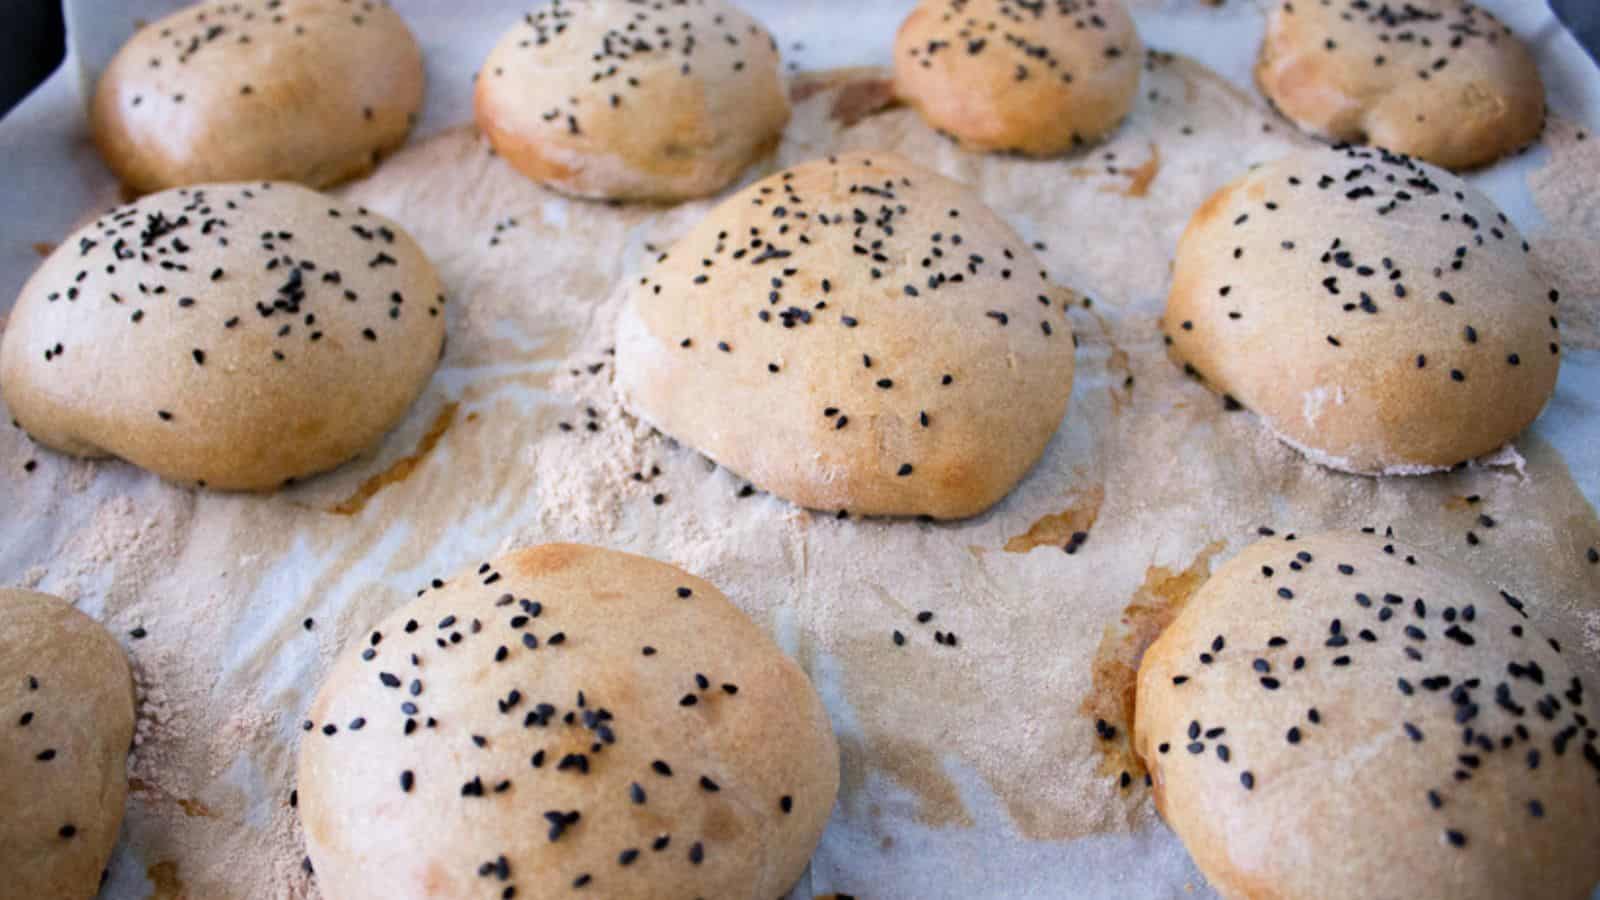 Sesame buns with sesame seeds on a wooden cutting board.